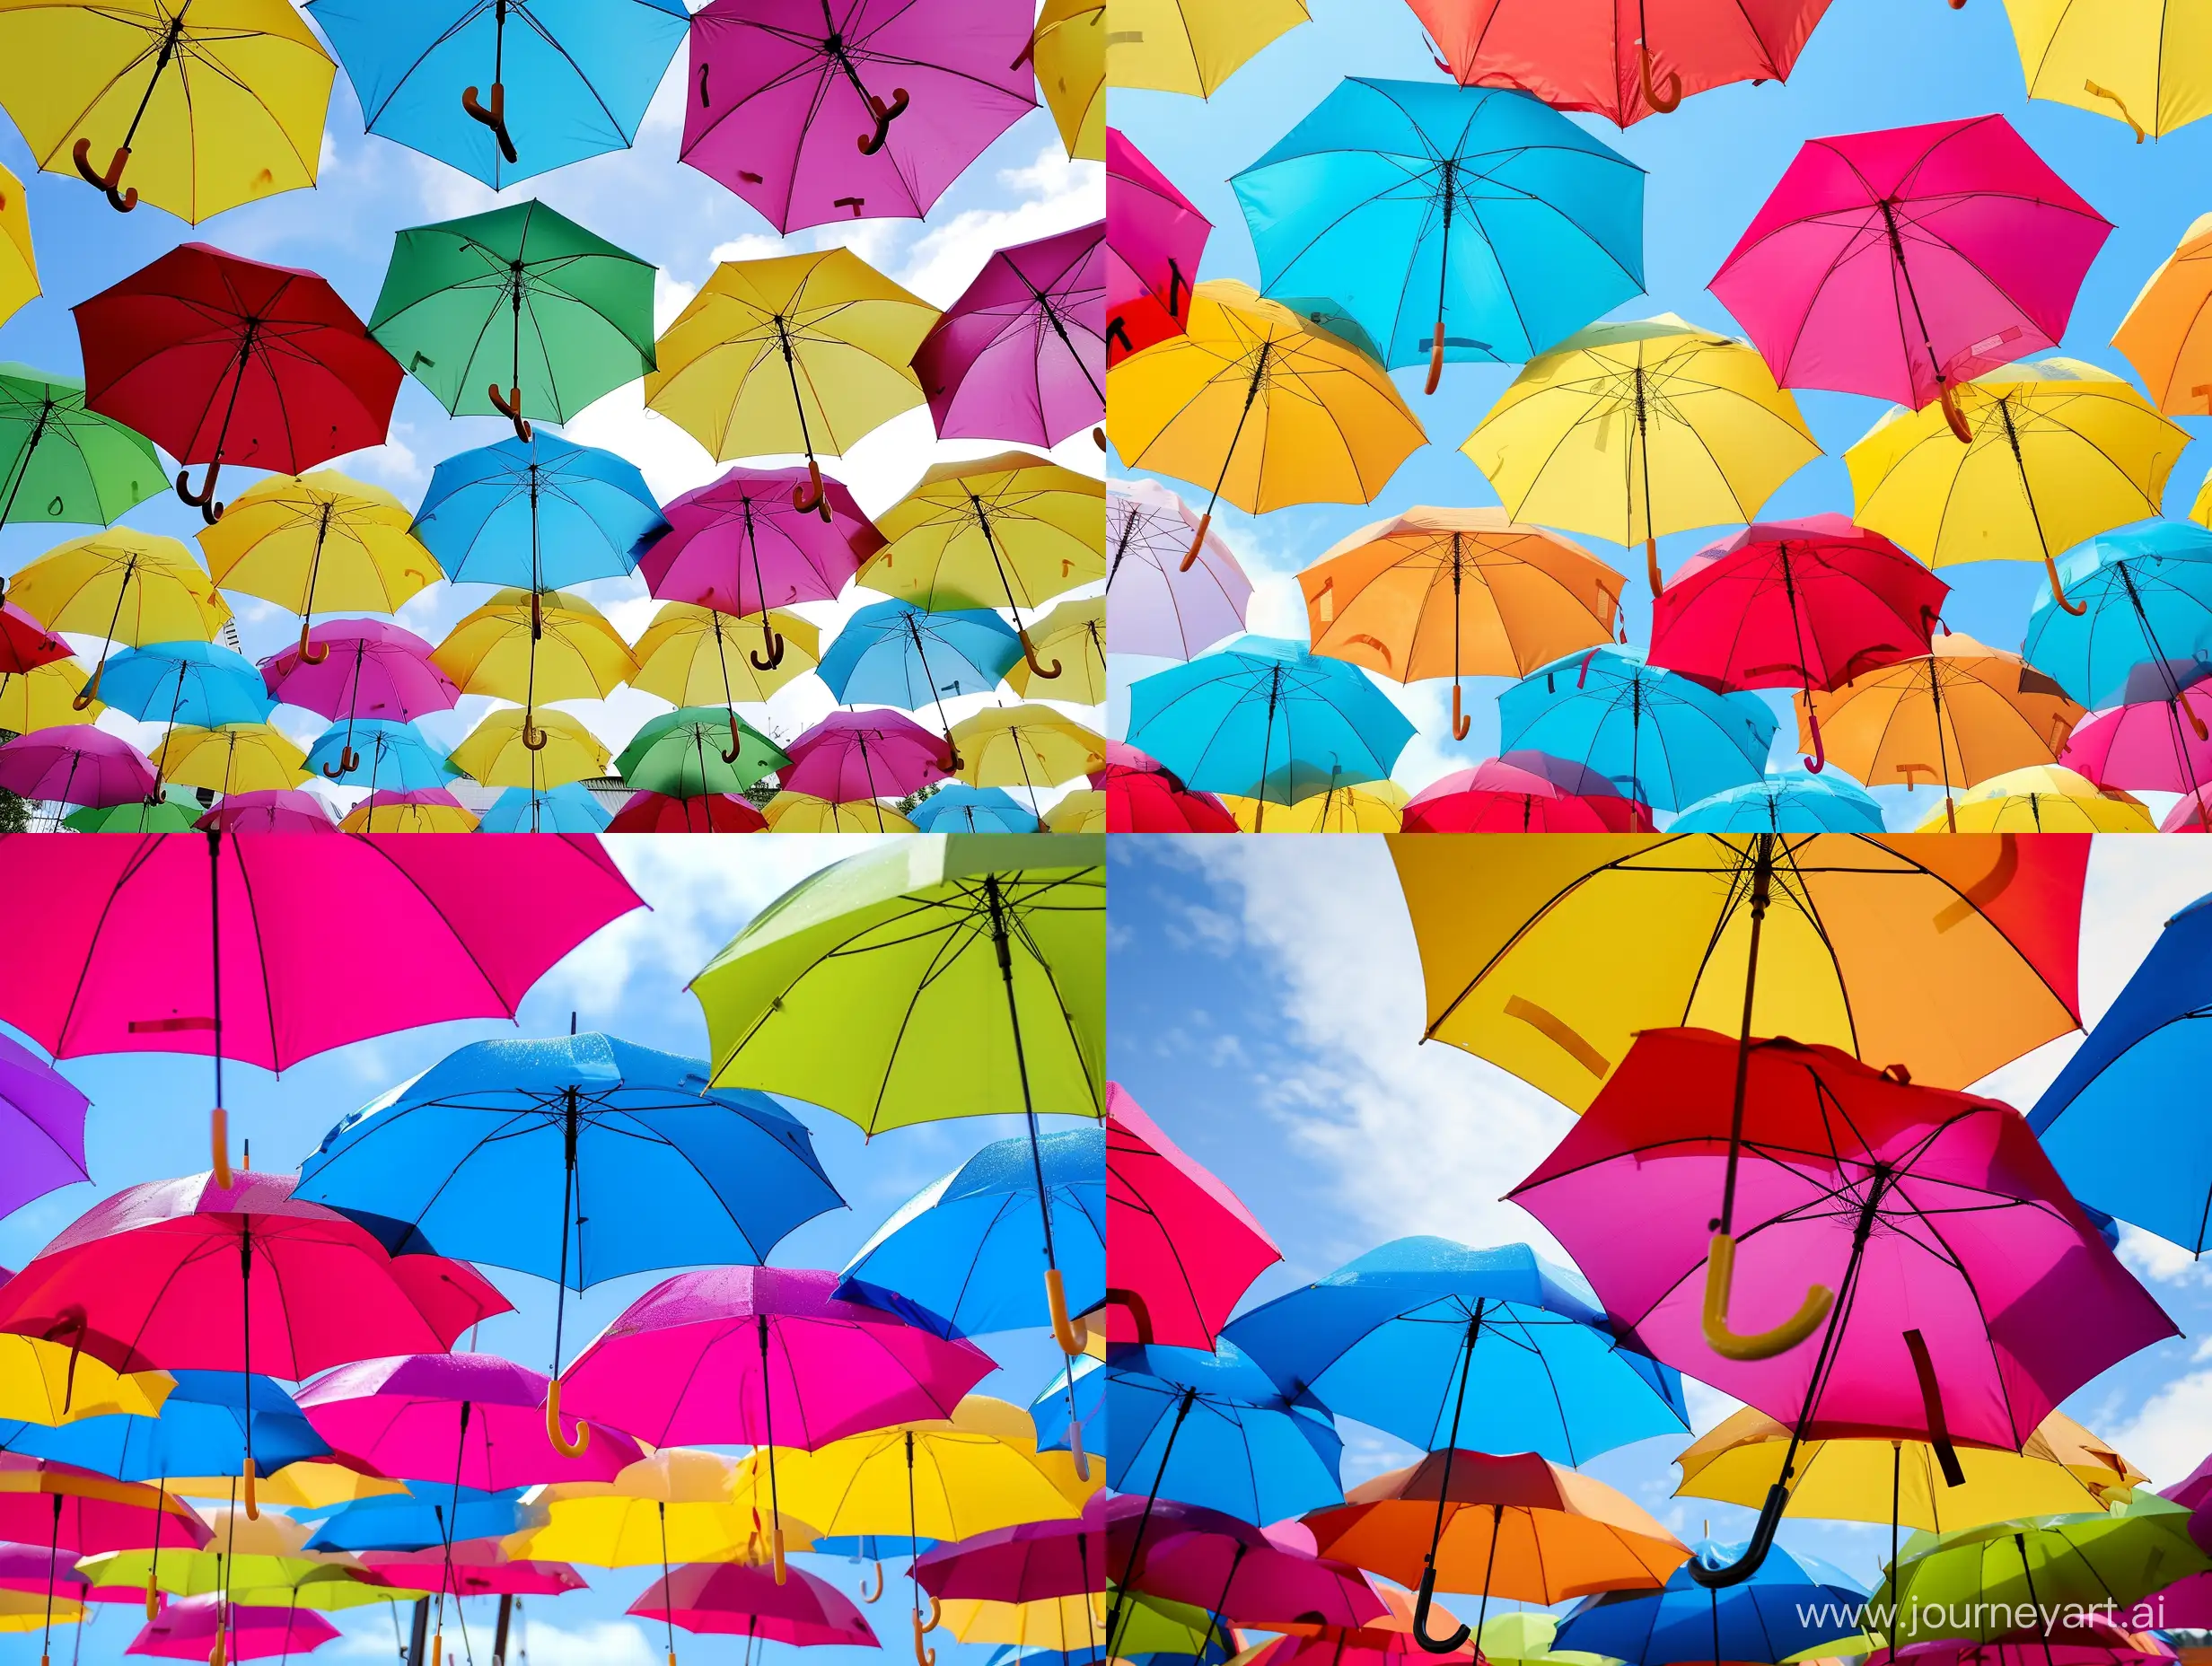 Vibrant-Umbrellas-Decorating-the-Sky-in-a-Stunning-Display